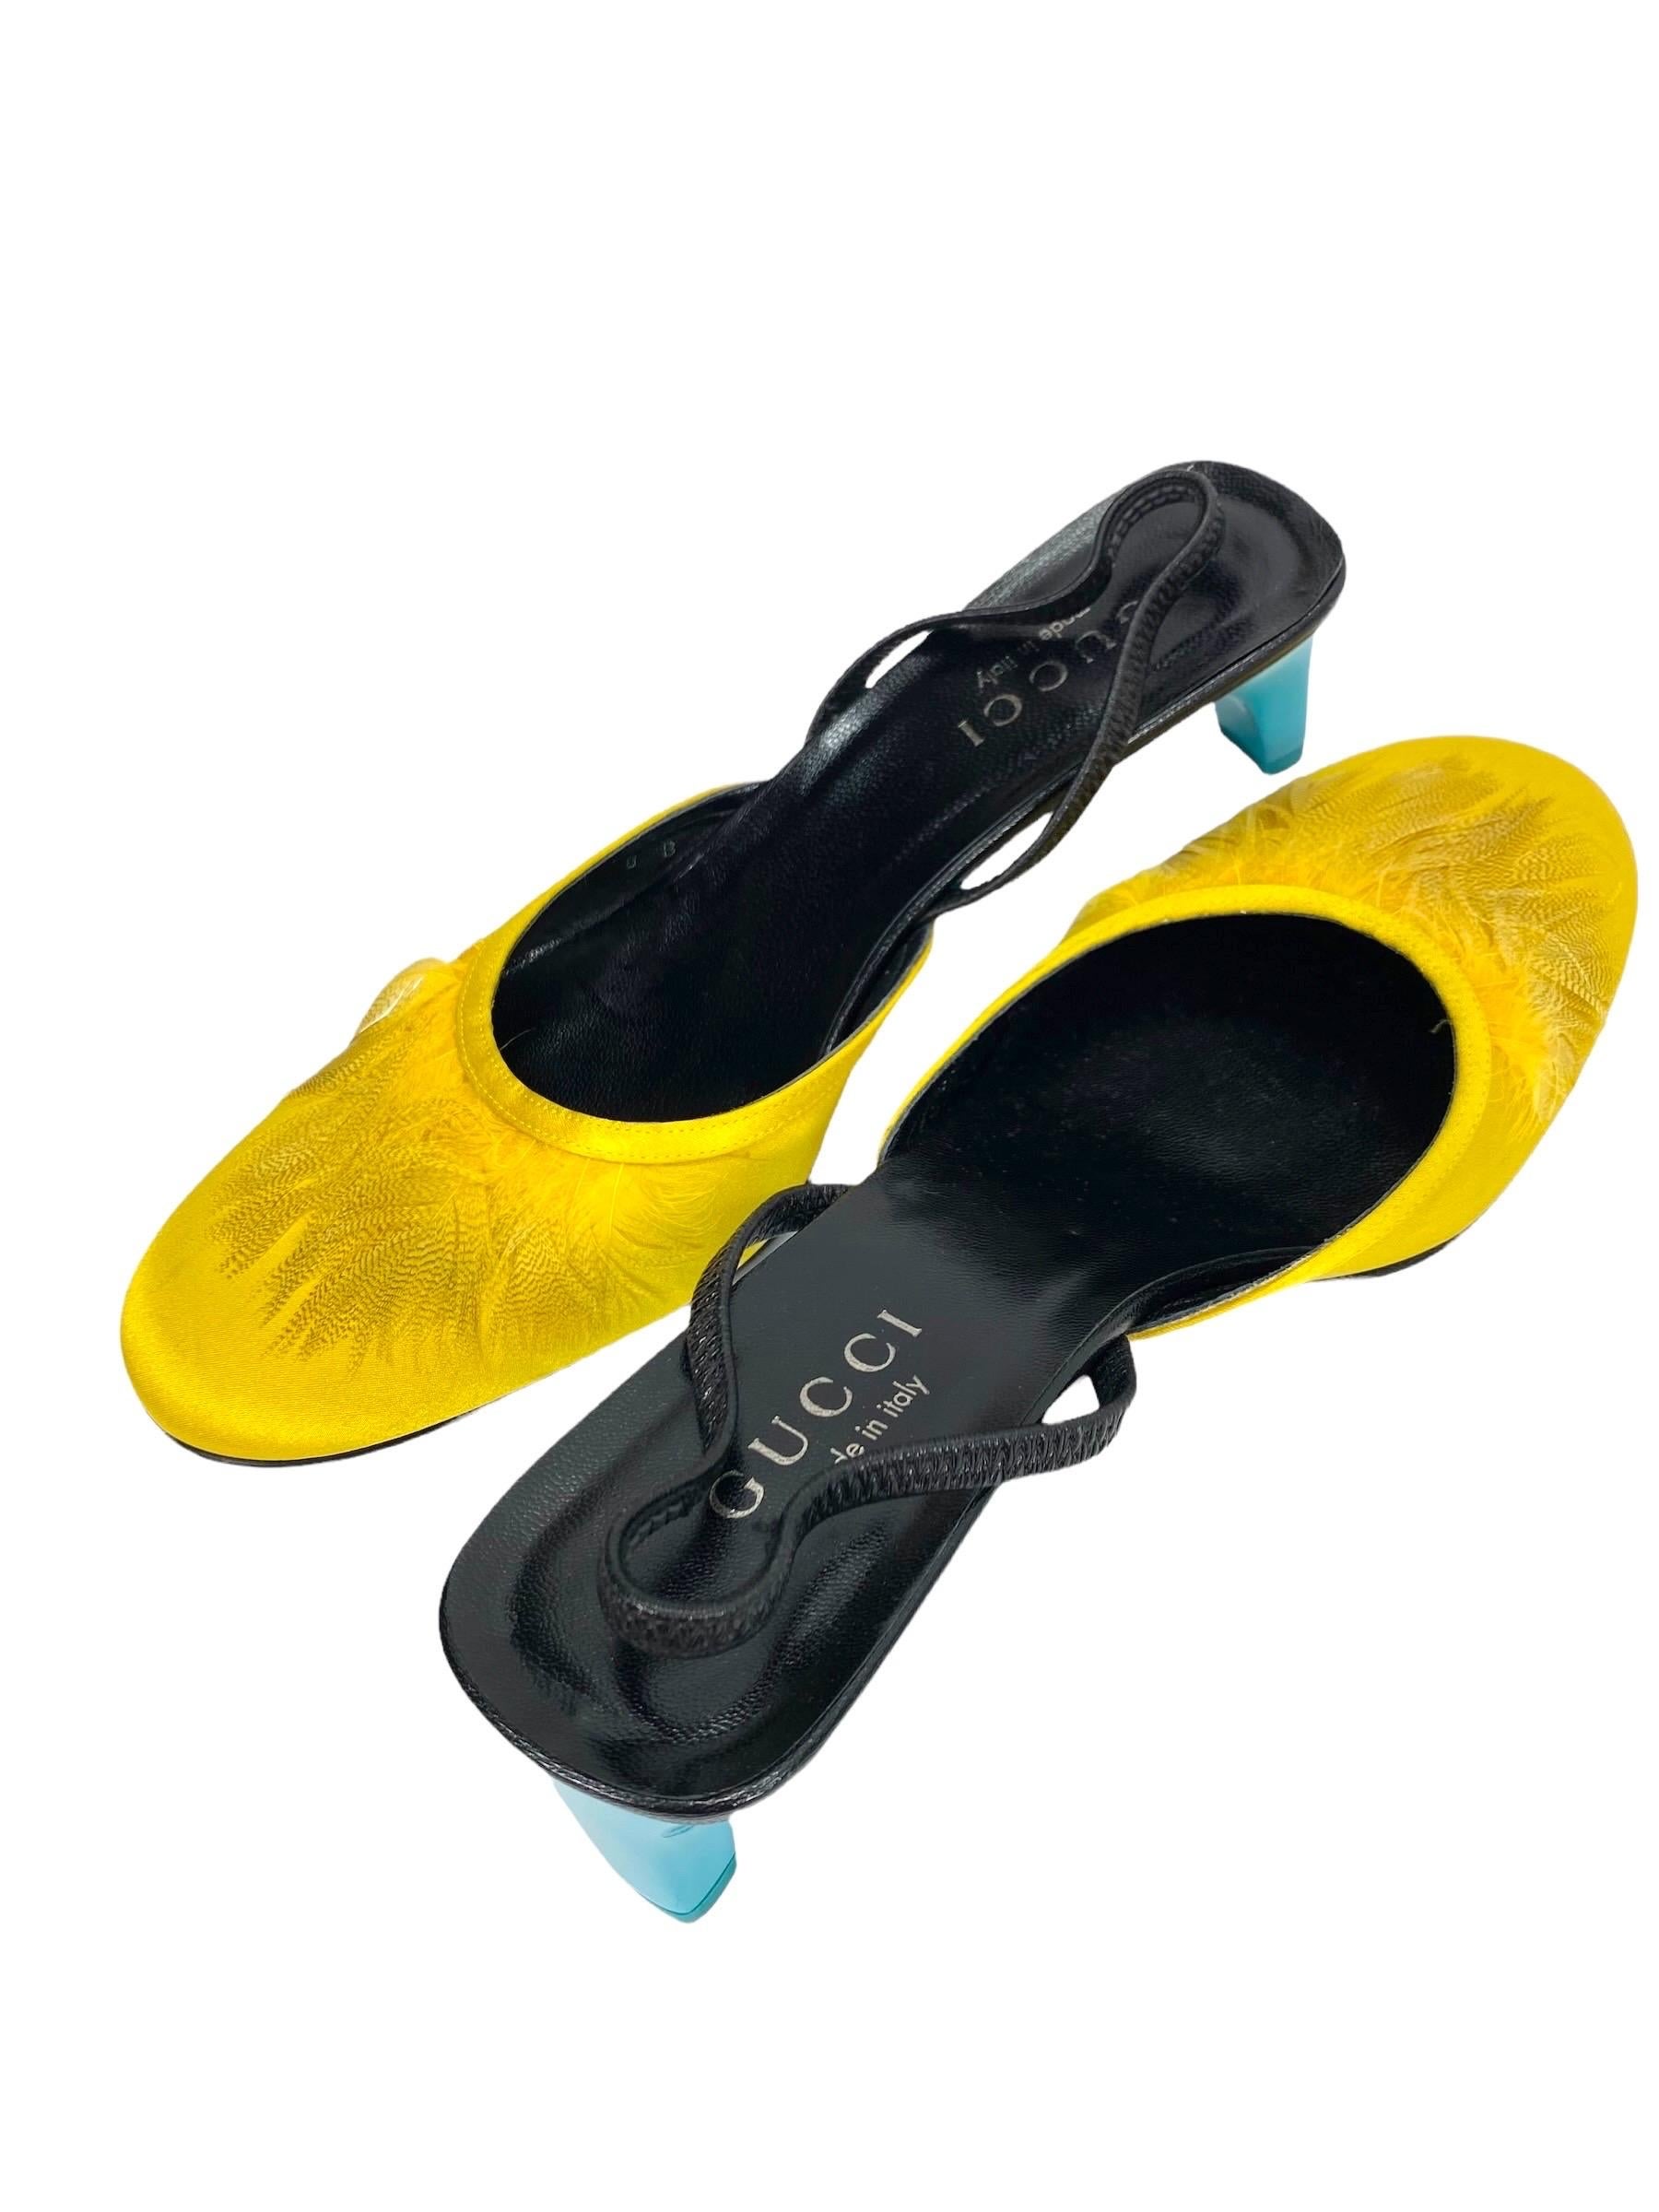 Tom Ford for Gucci S/S 1999 Vintage Yellow Crepe Satin Shoes With Feathers Sz. 8 For Sale 1